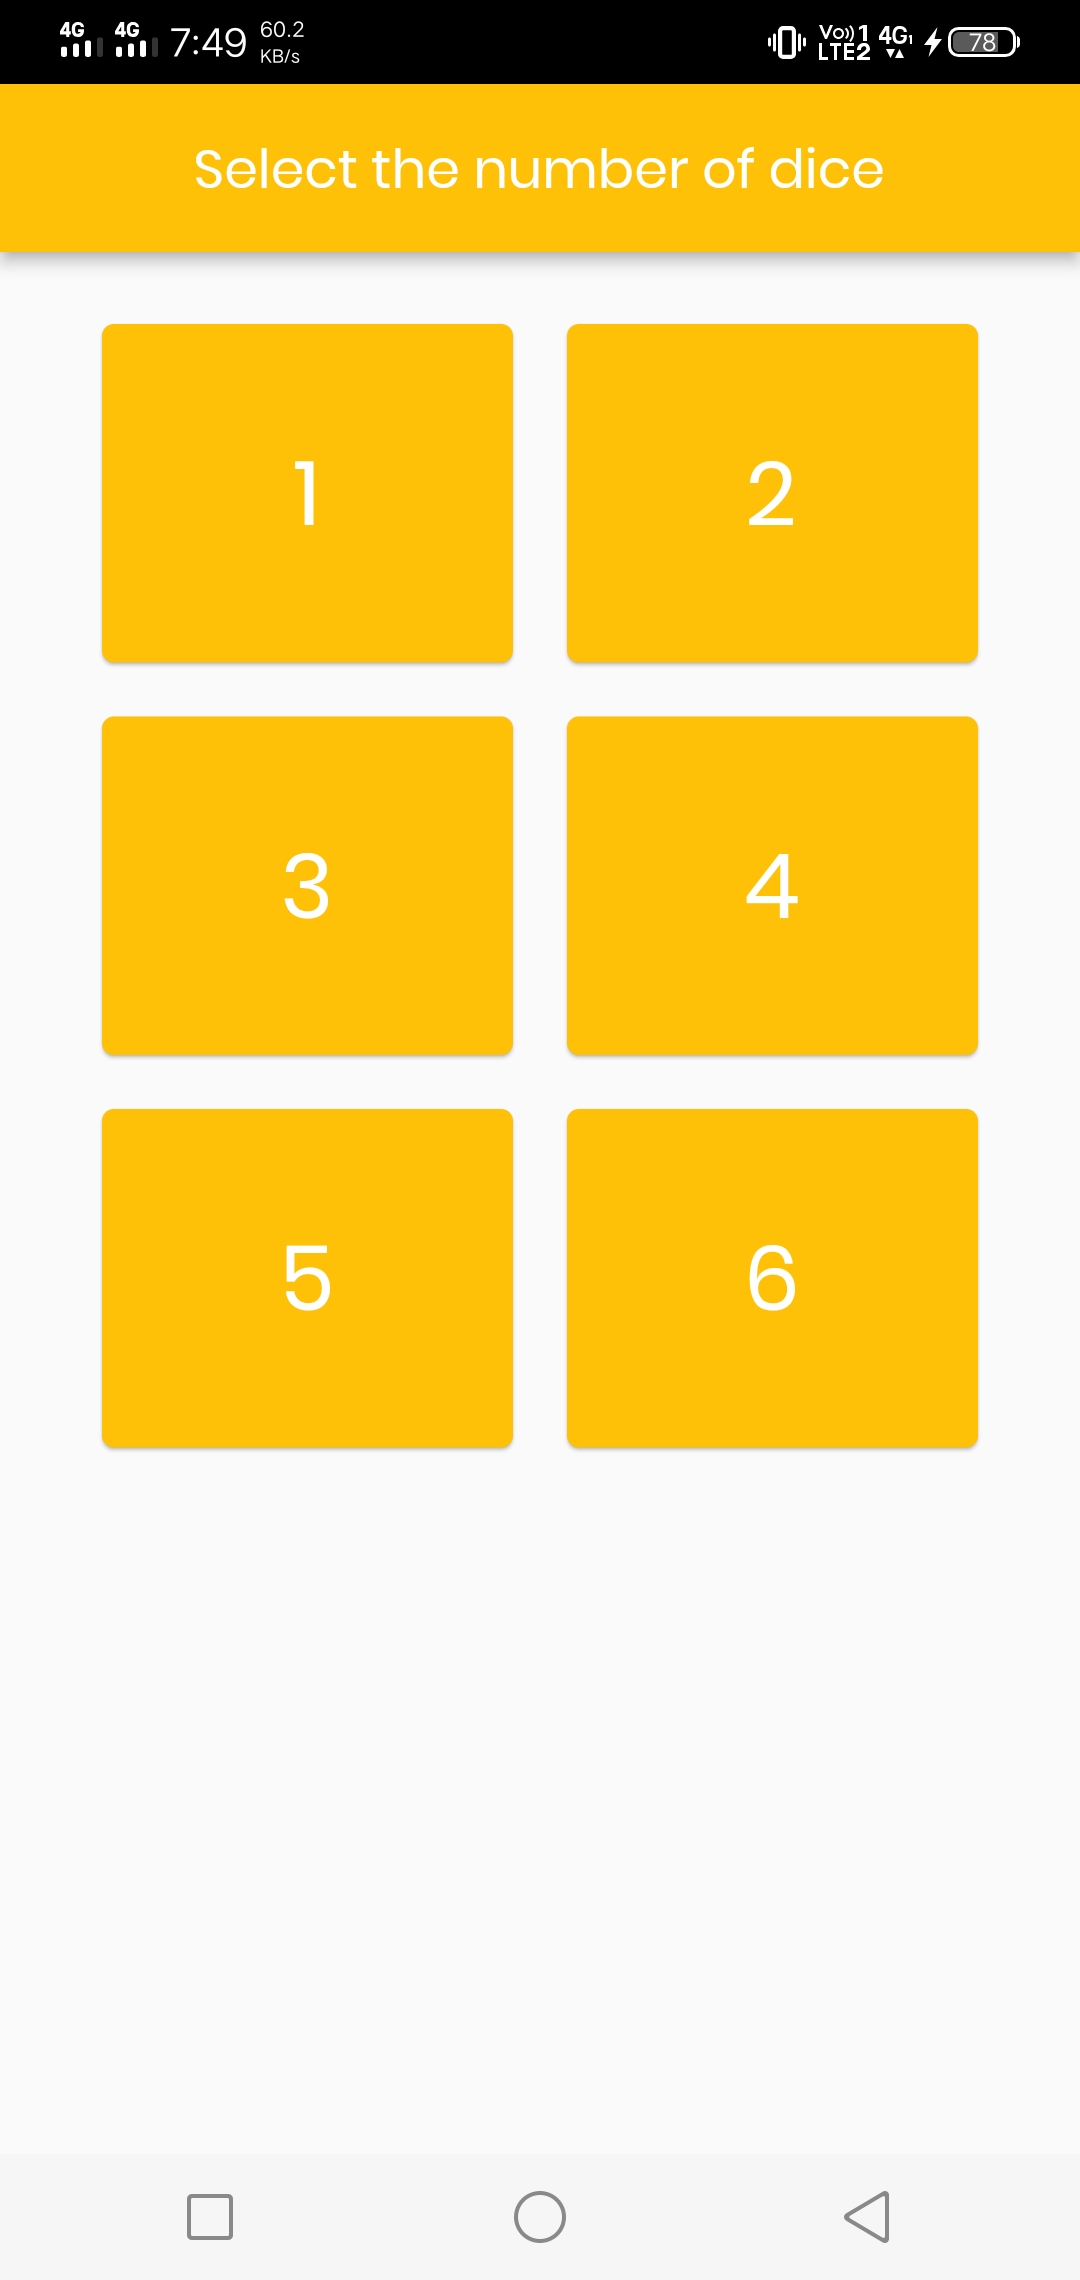 Flutter Dice Game Made In Flutter 2.8 with null safety